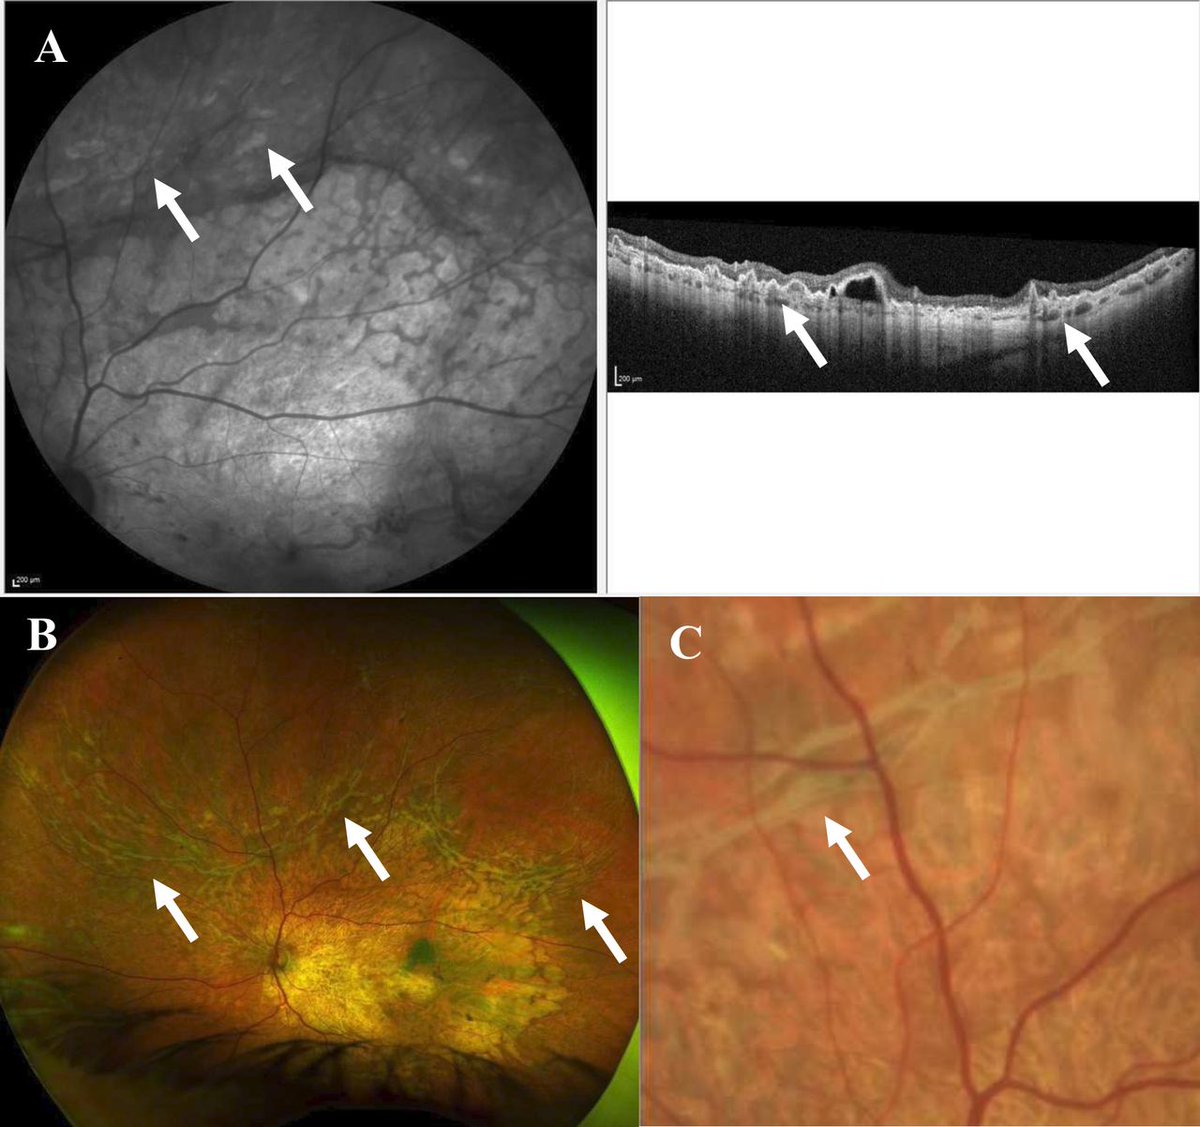 A new study finds that outer retinal corrugations can be a clinical and diagnostic feature of Late-onset #retinal degeneration (L-ORD) on #OCT. Read more here: bit.ly/3v7ahmO #retina #ophthalmology #vision #eyes #genetics #imaging #health